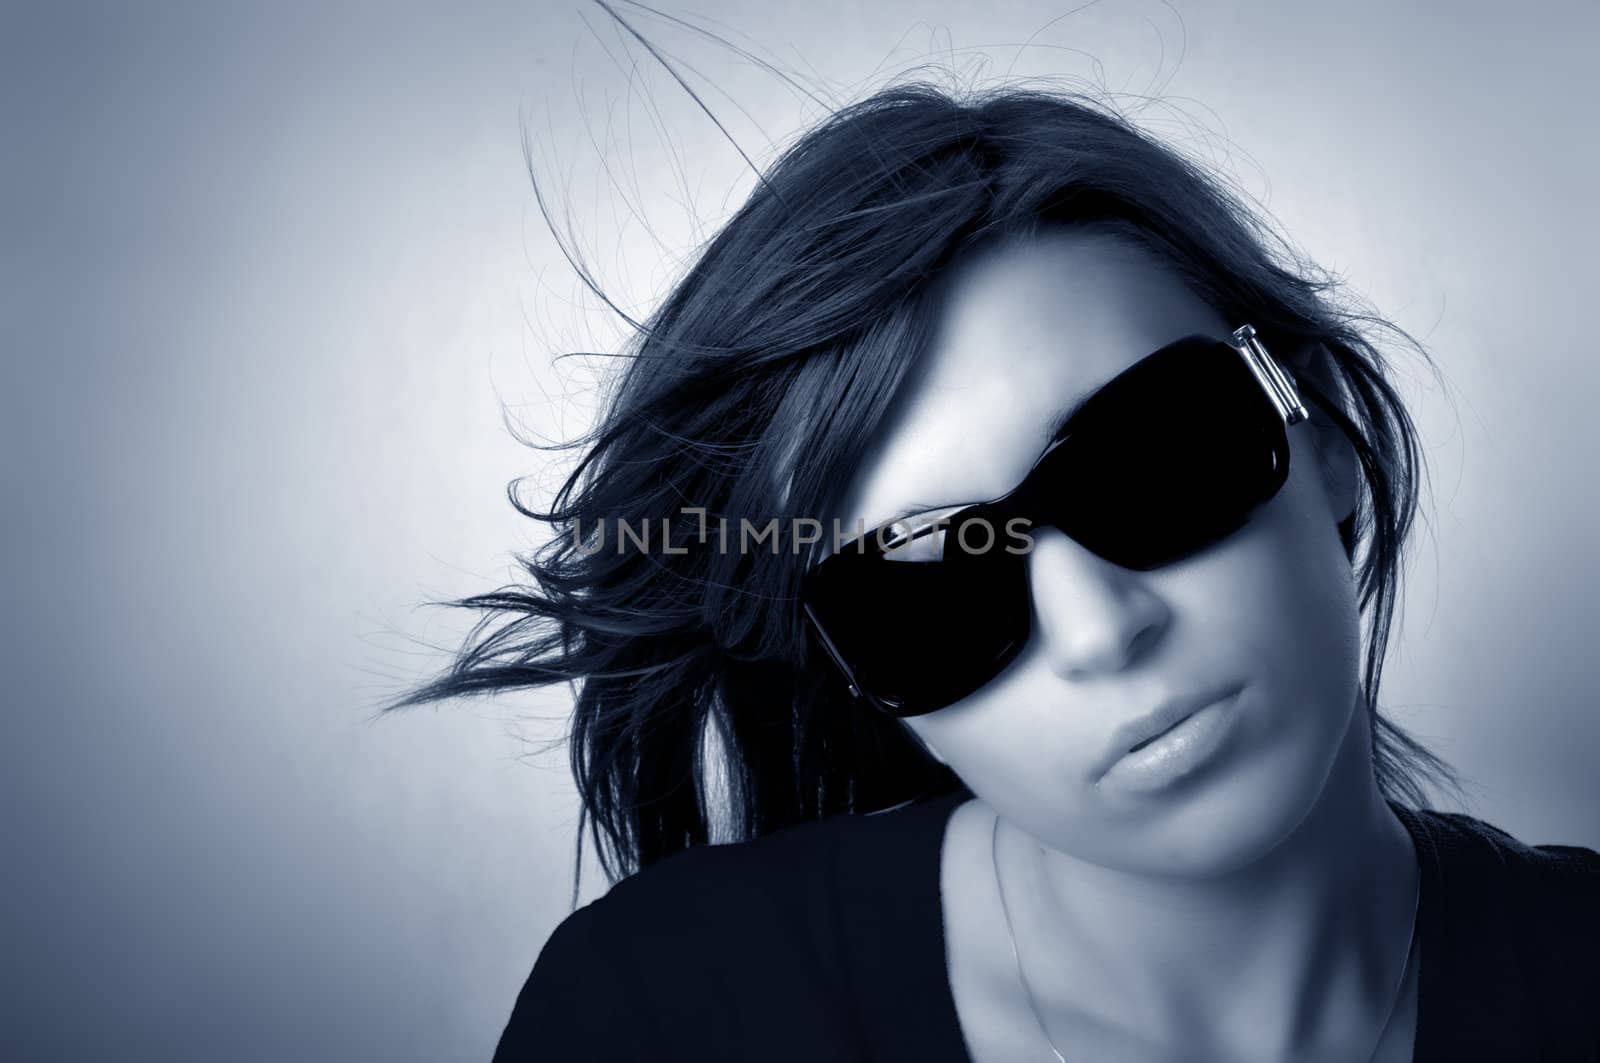 Modern, stylish portrait of young woman by photocreo